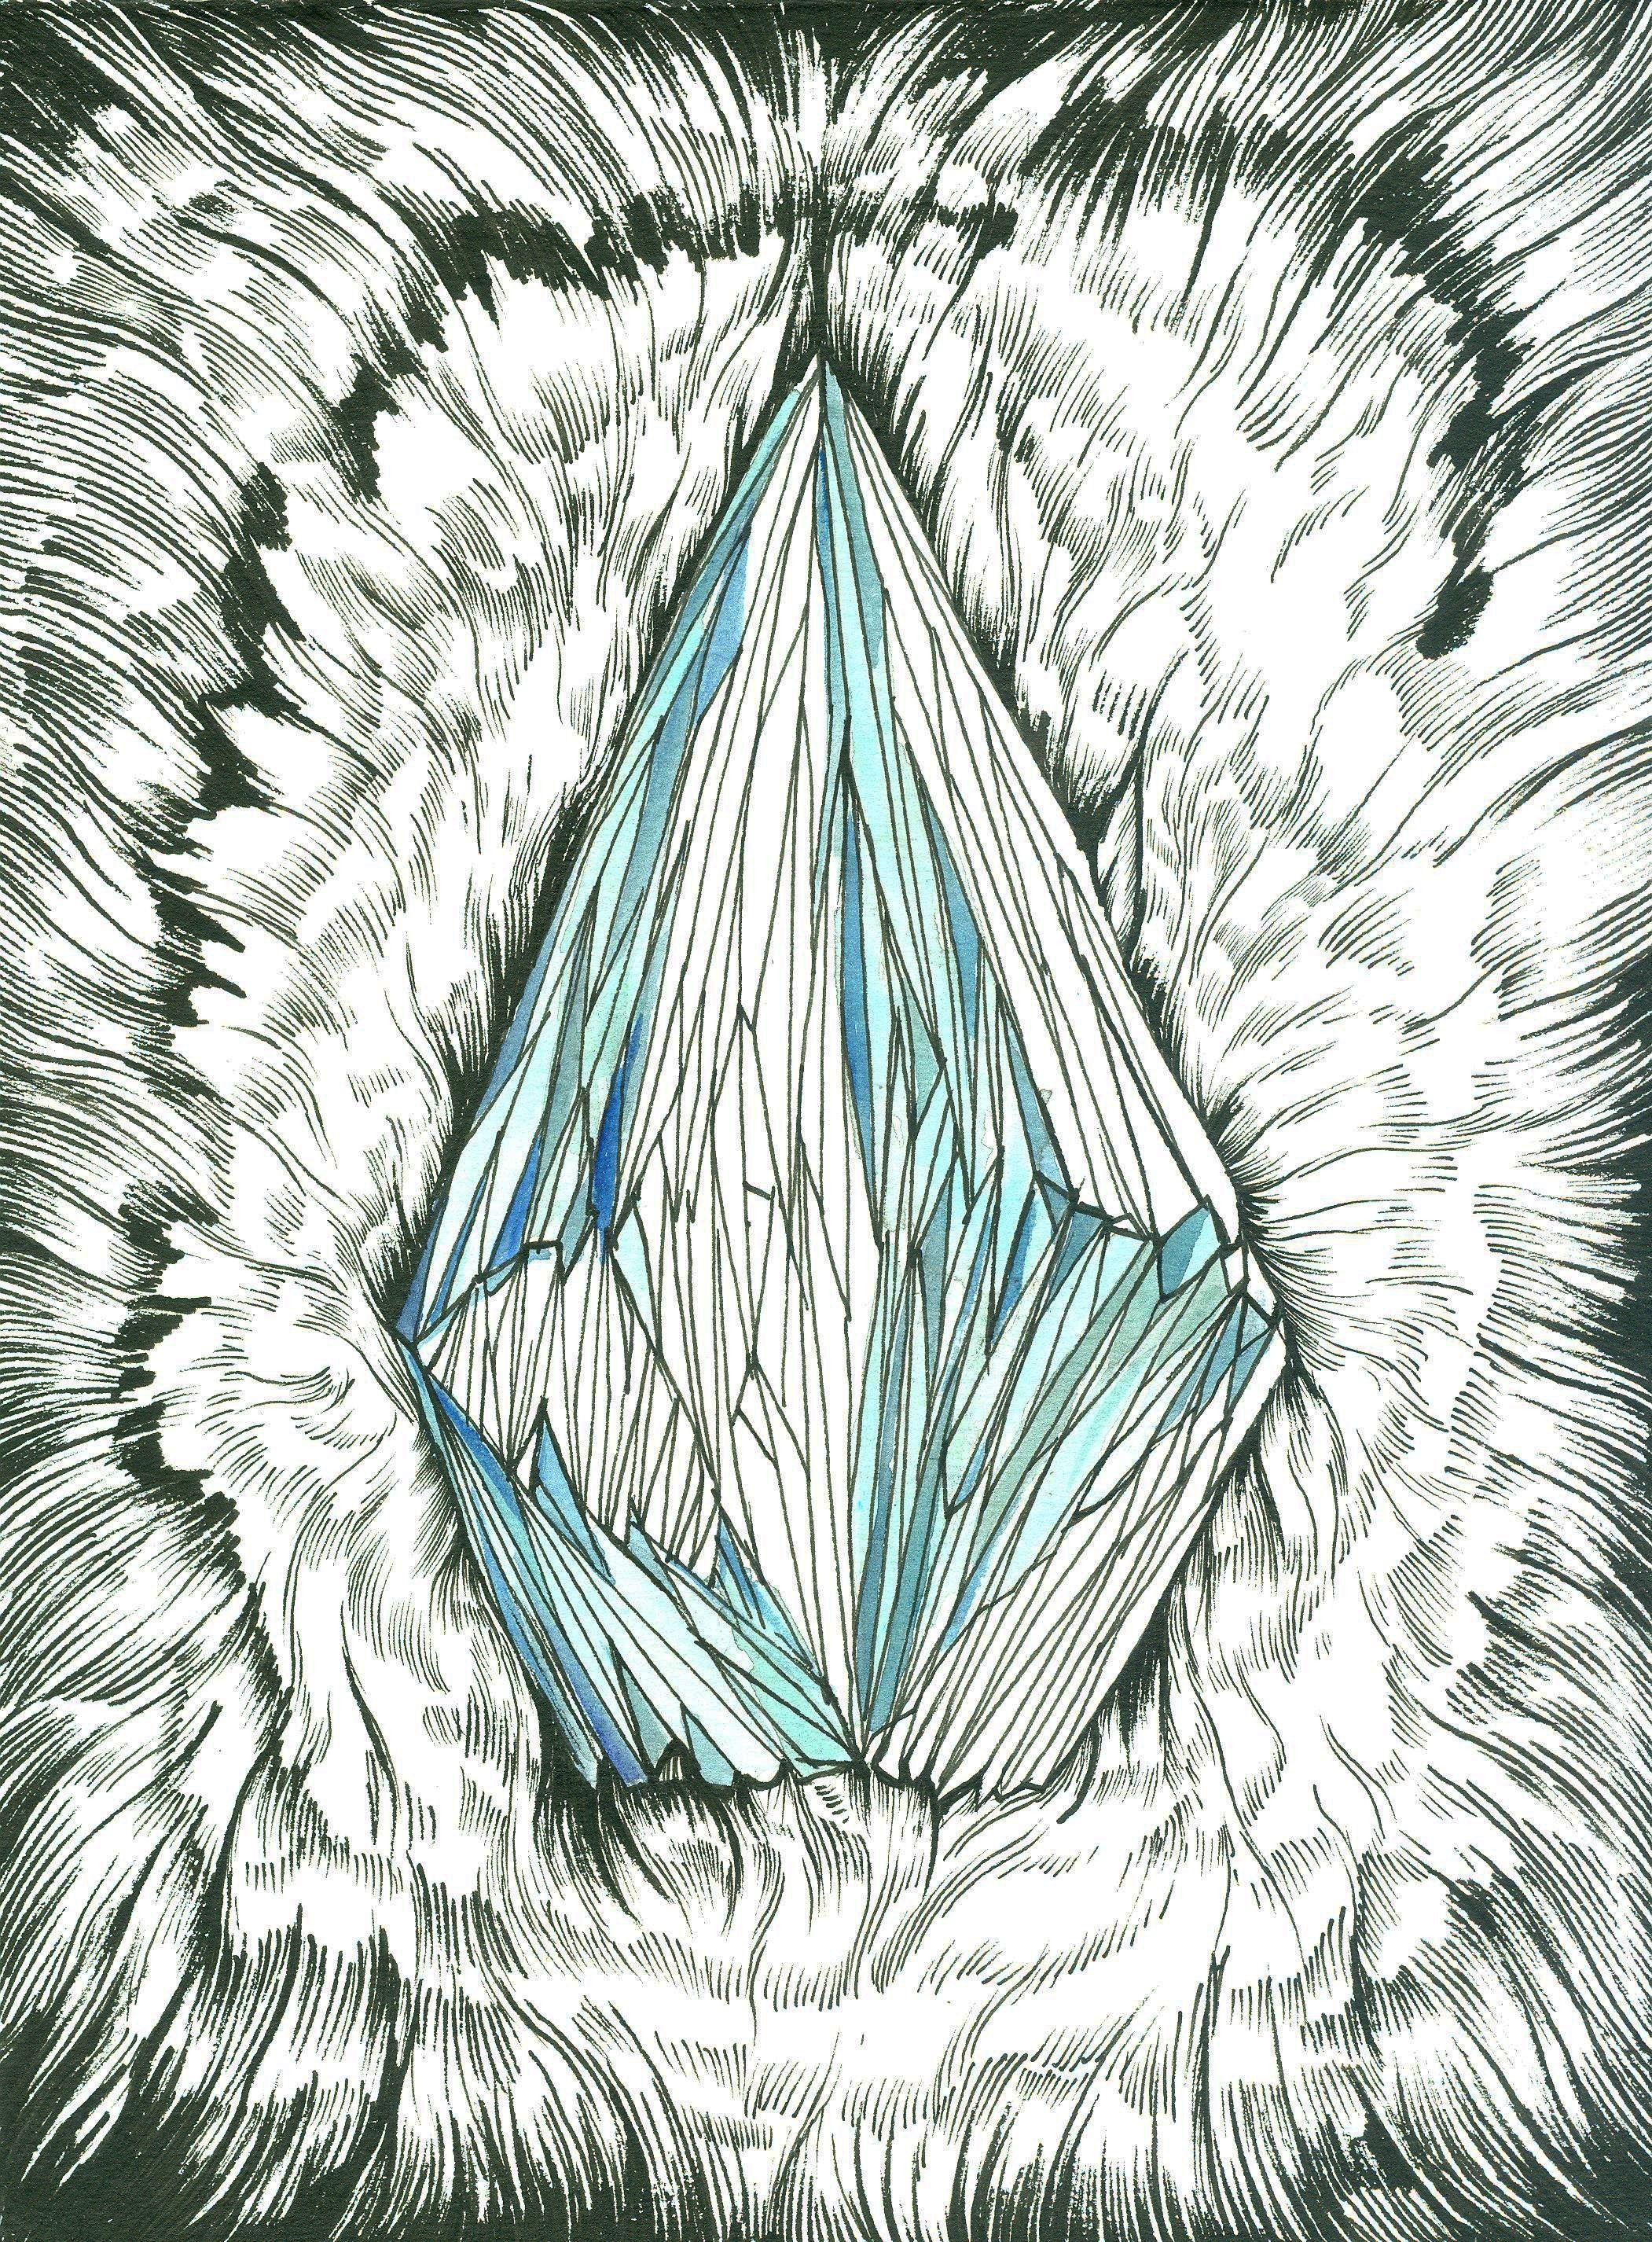 Volcom Iphone Wallpapers Top Free Volcom Iphone Backgrounds Wallpaperaccess